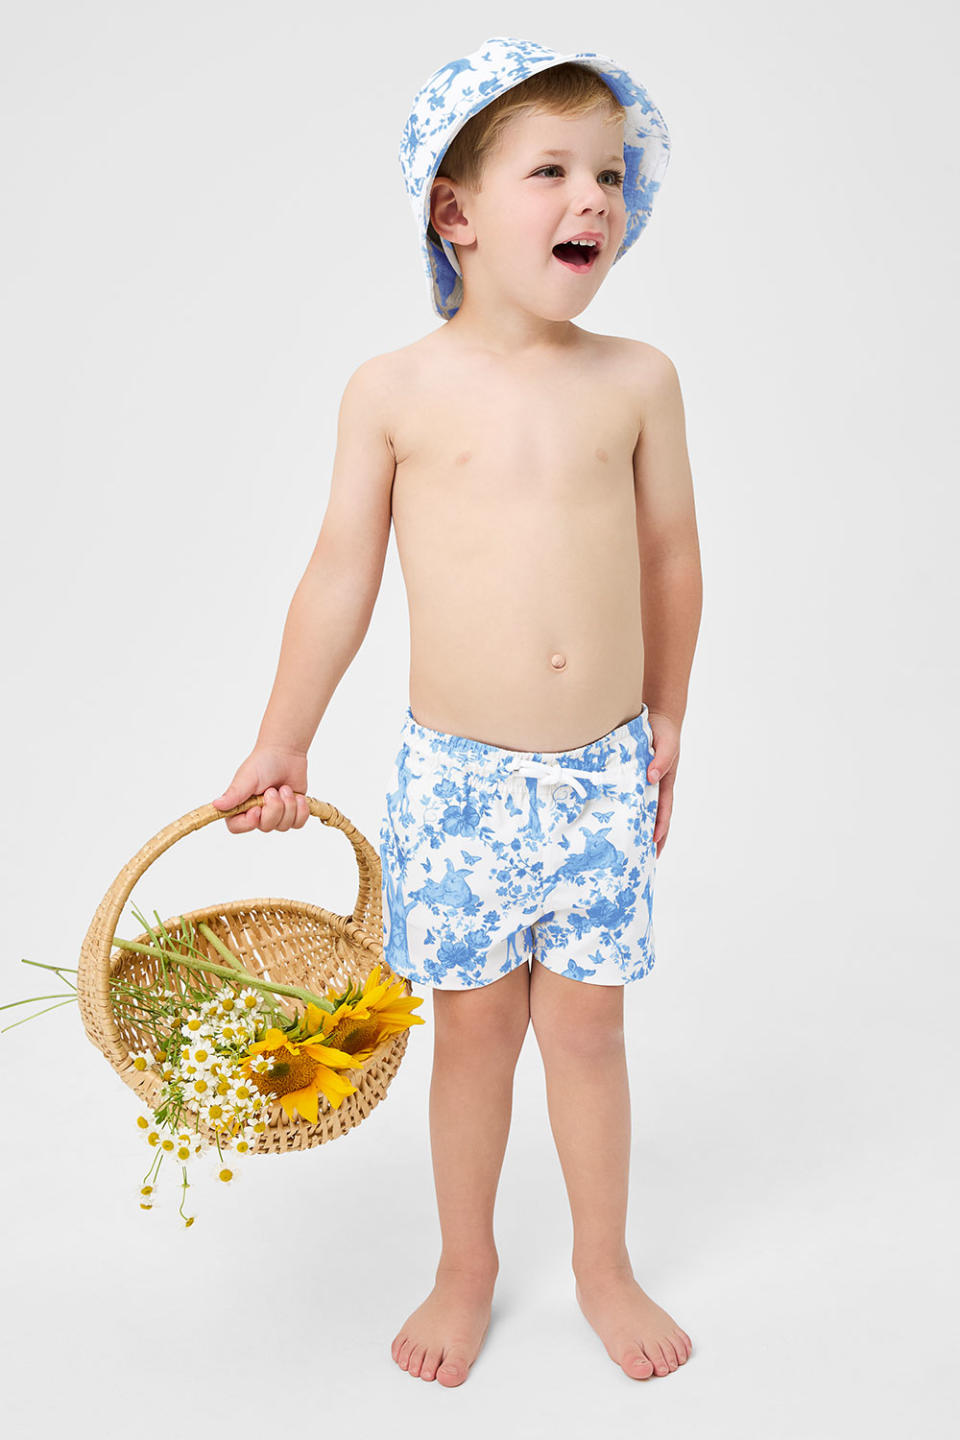 Frankies Bikinis’ Lil Frankies collection includes pieces for both girls and boys. - Credit: Courtesy Photo